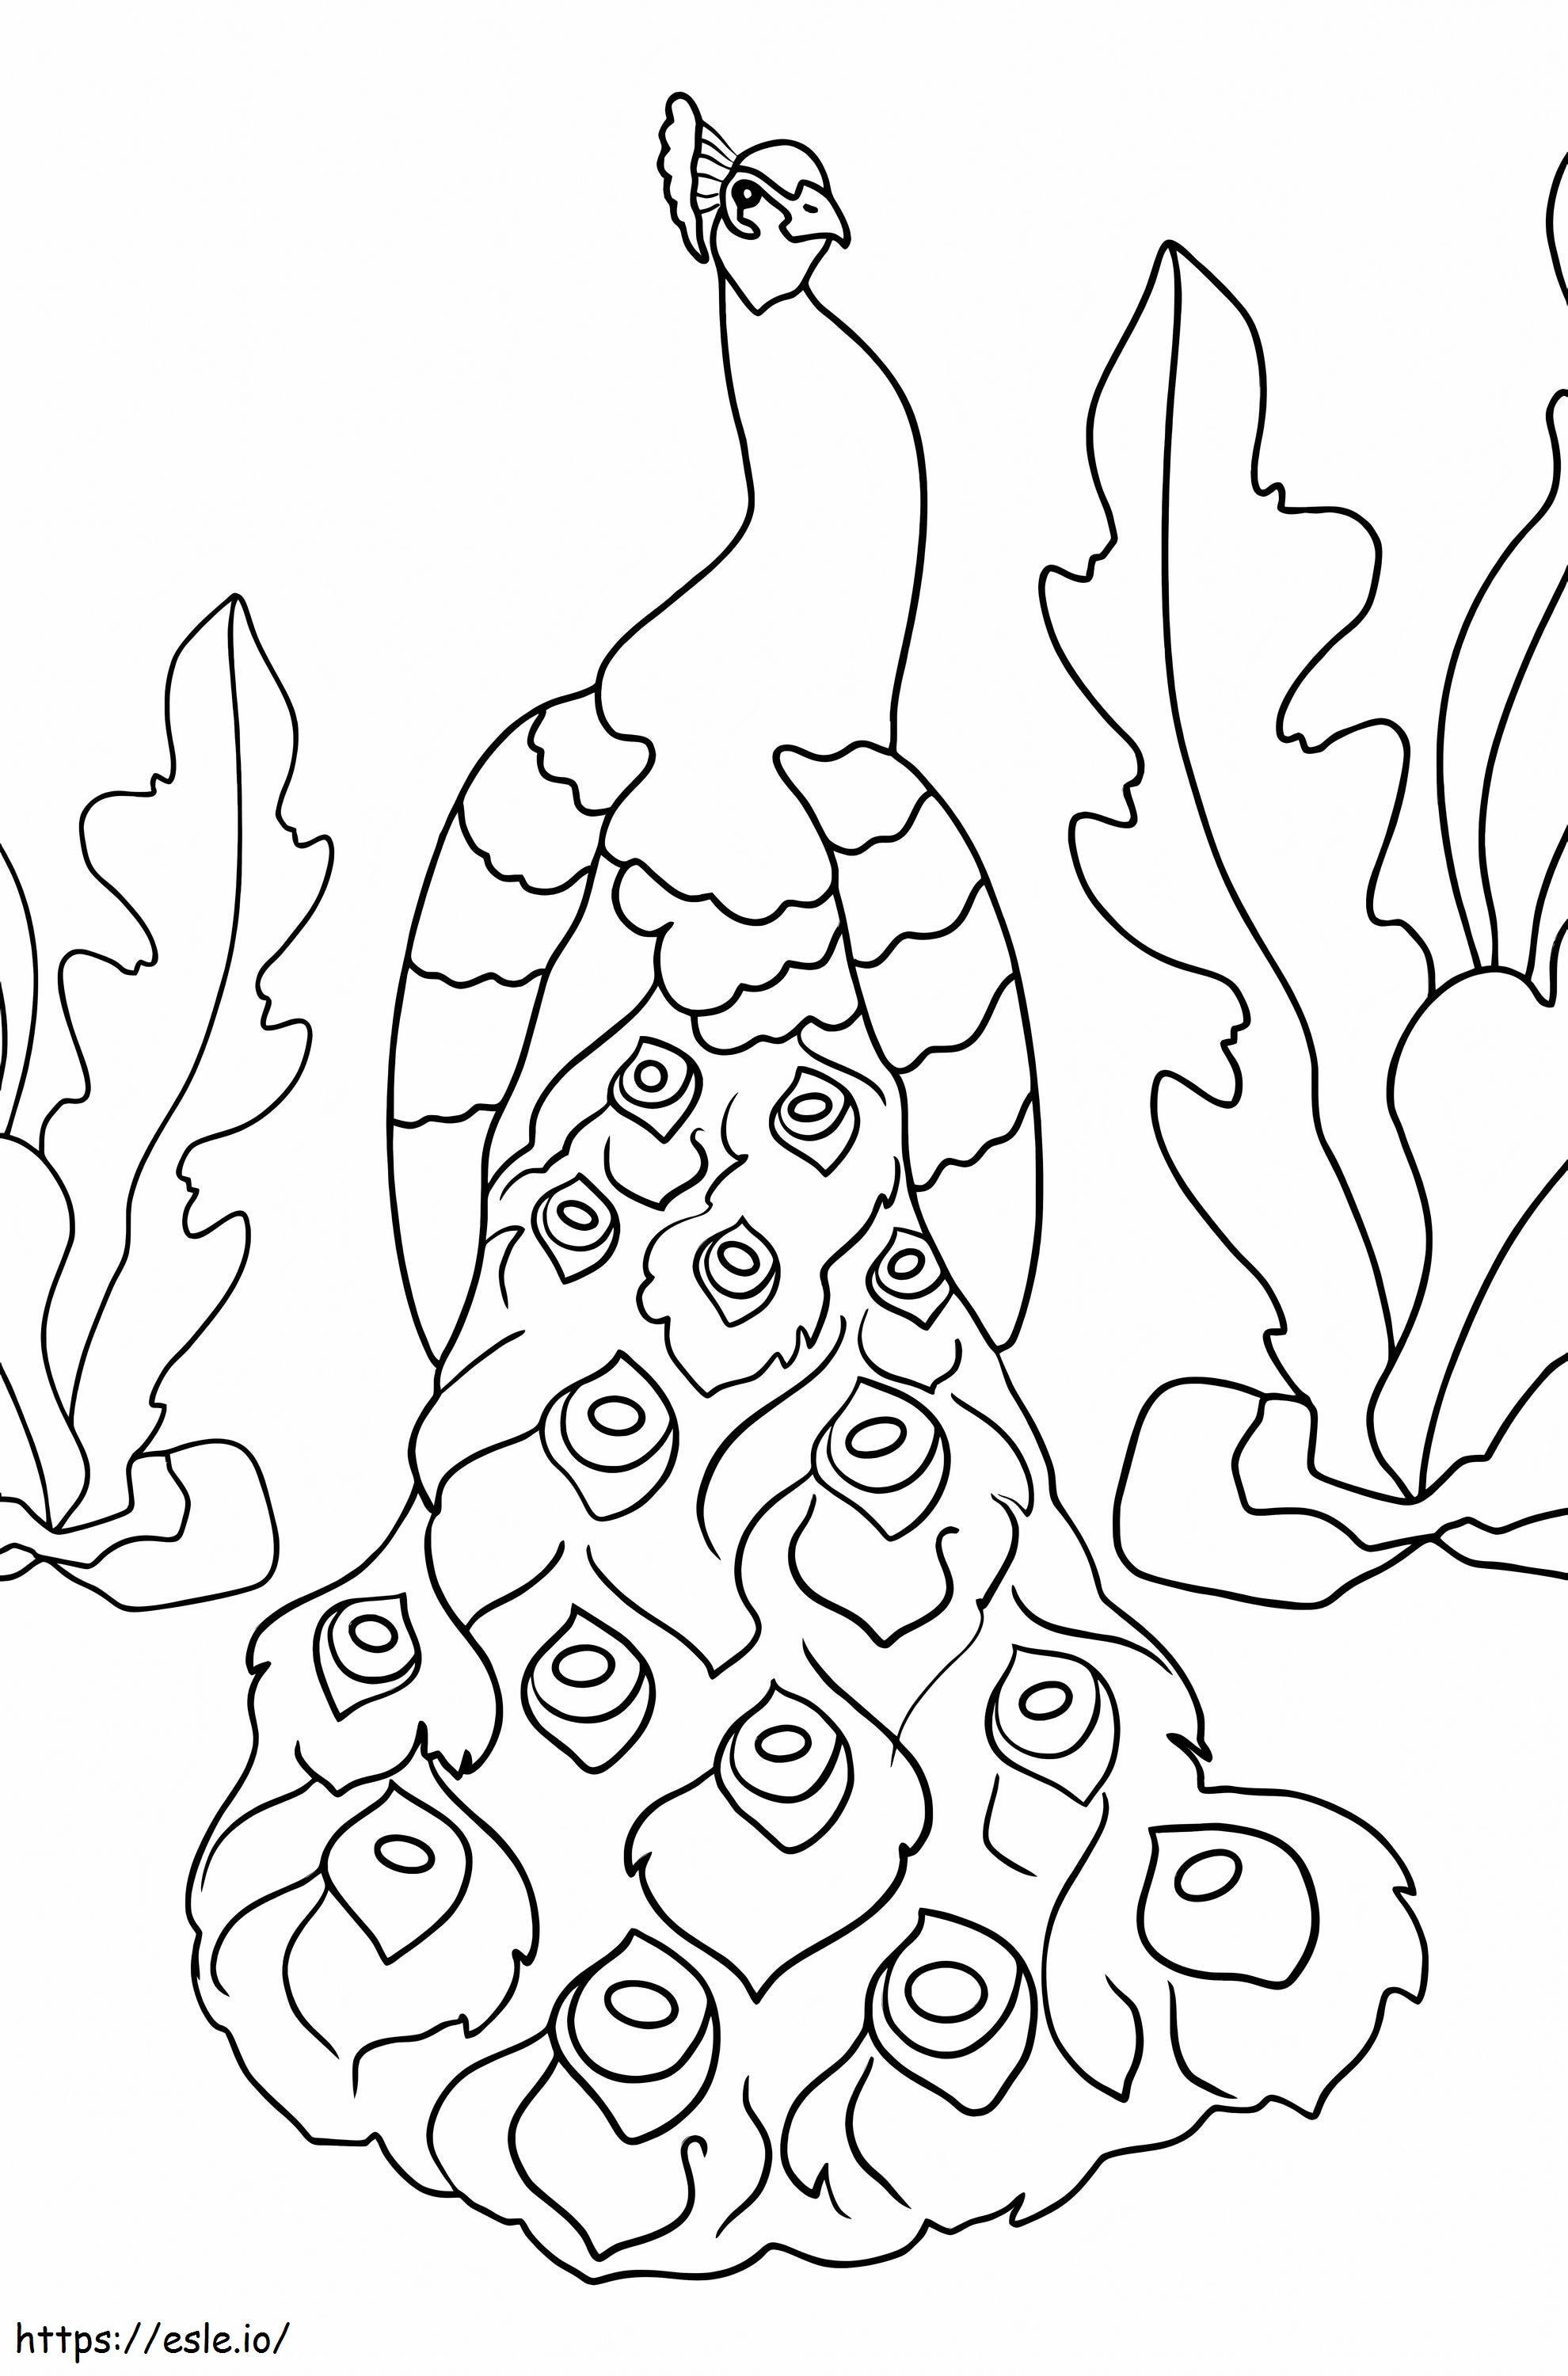 Printable Peacock coloring page